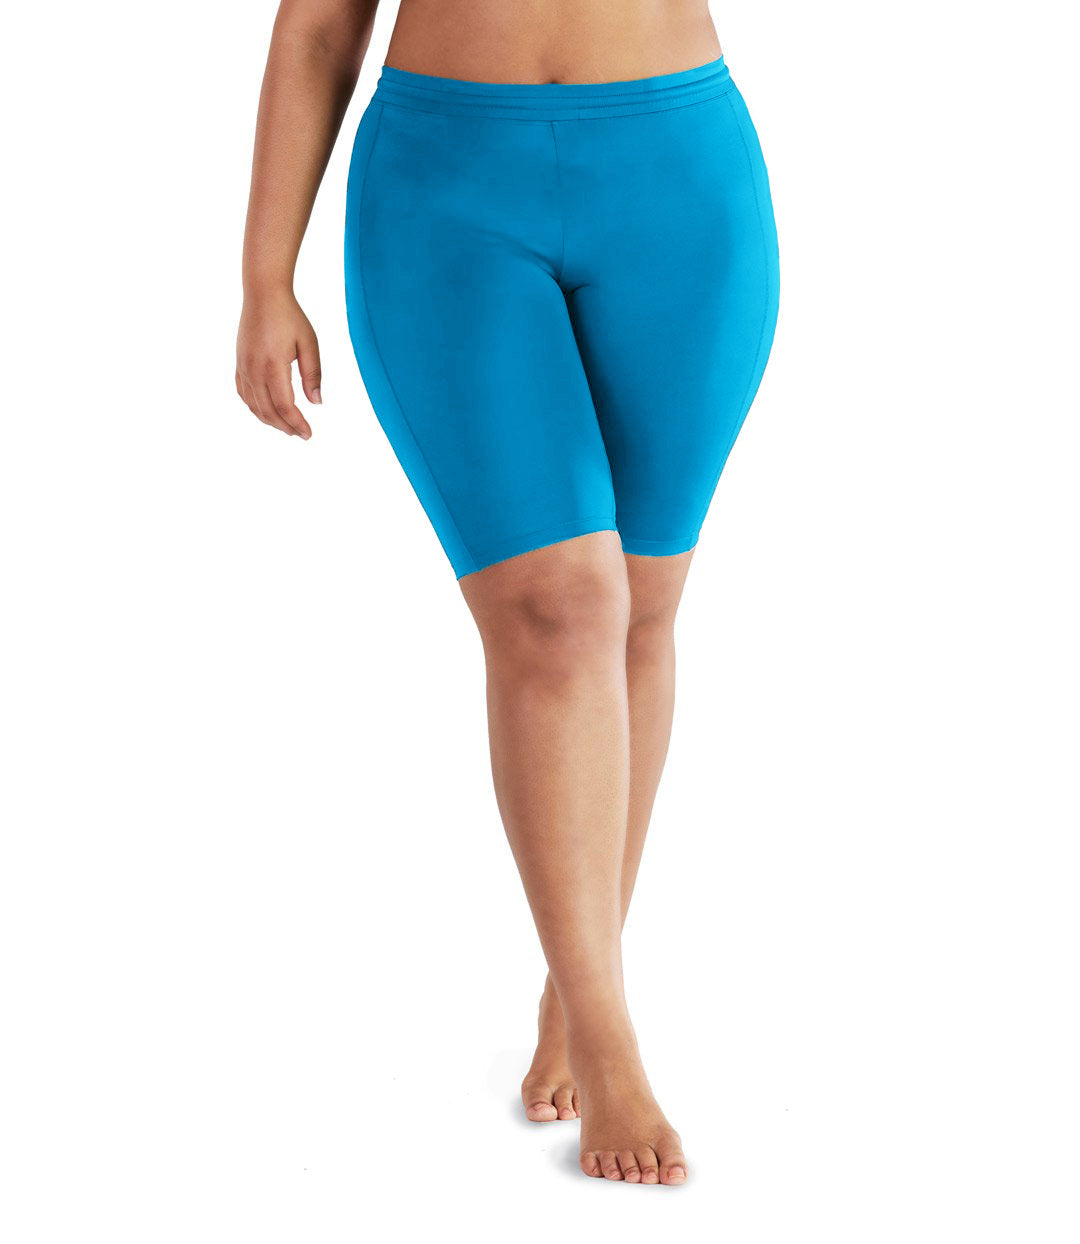 Bottom half of plus size woman facing front  wearing JunoActive QuikEnergy Fitted Swim Short.  The short is turquoise and is tight to the body.  The hem is just above the knee.